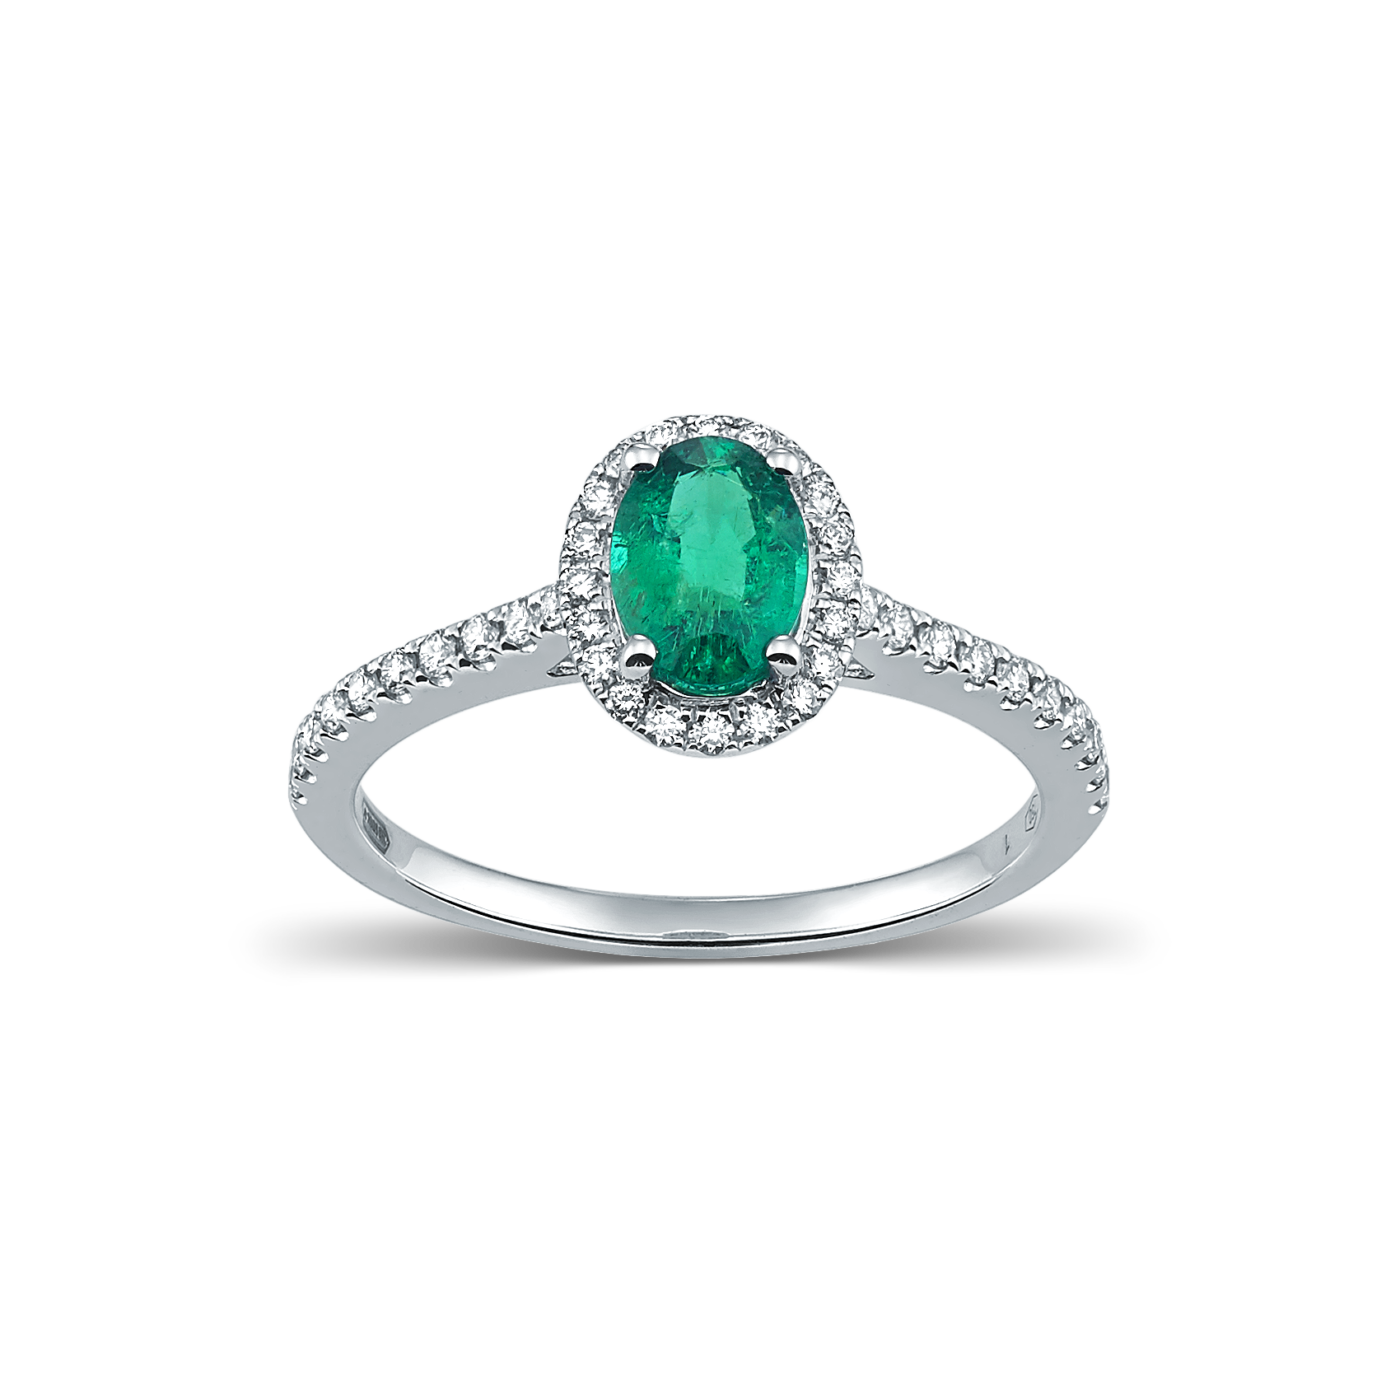 Devous Emerald Ring with Diamonds